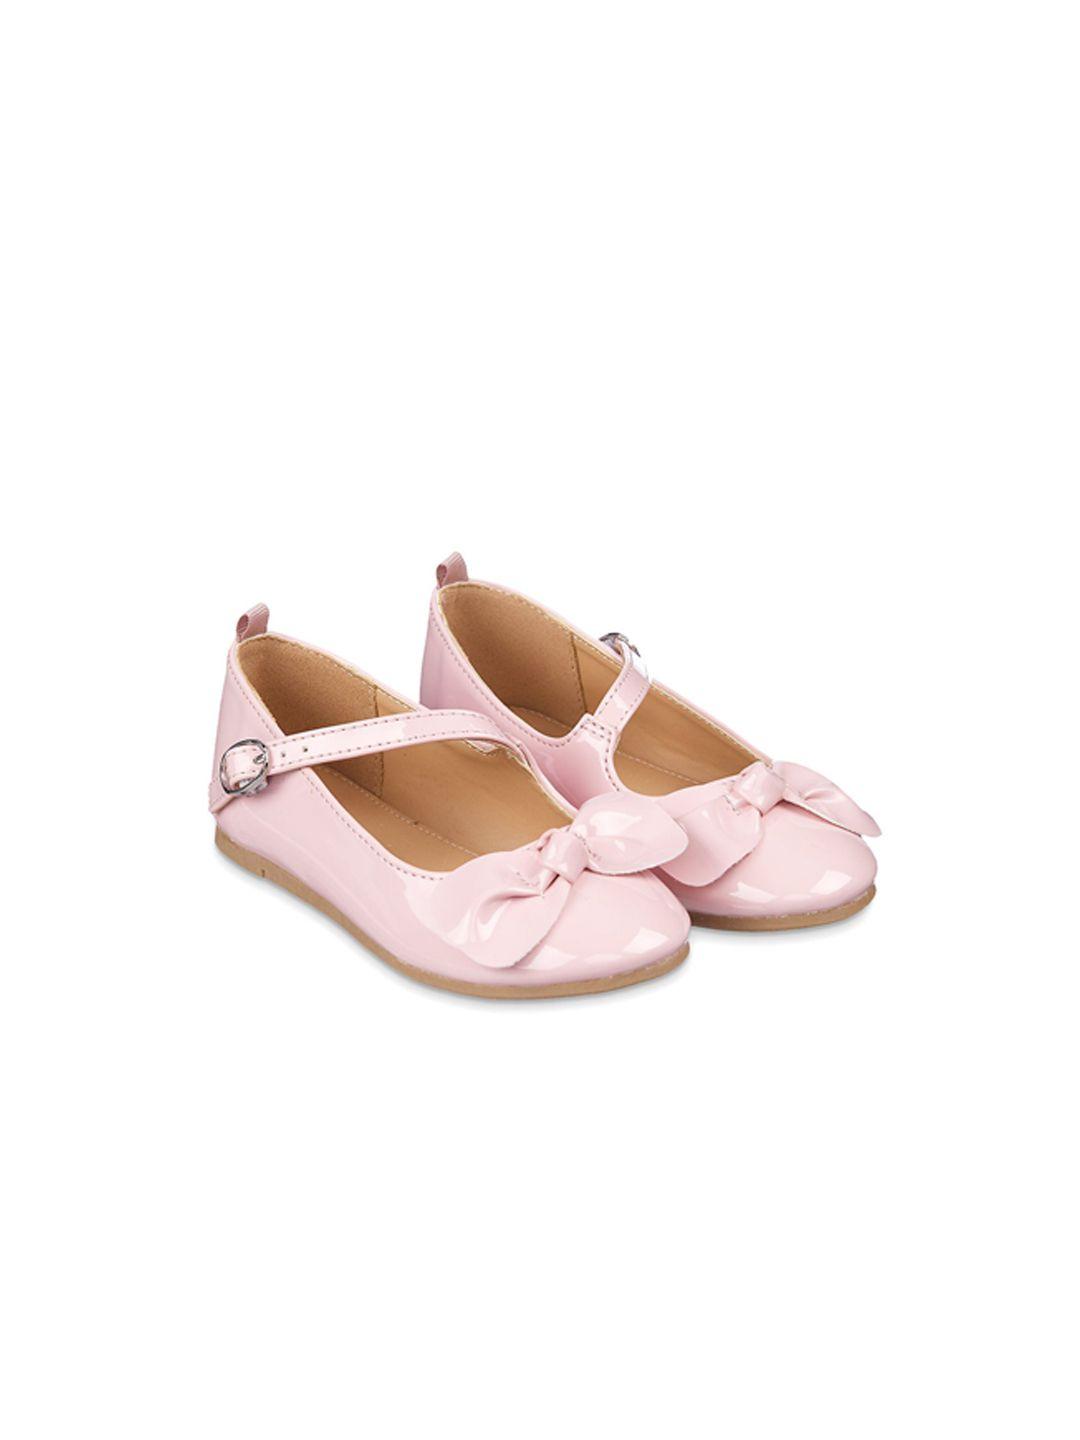 mothercare girls pink mary janes with bows